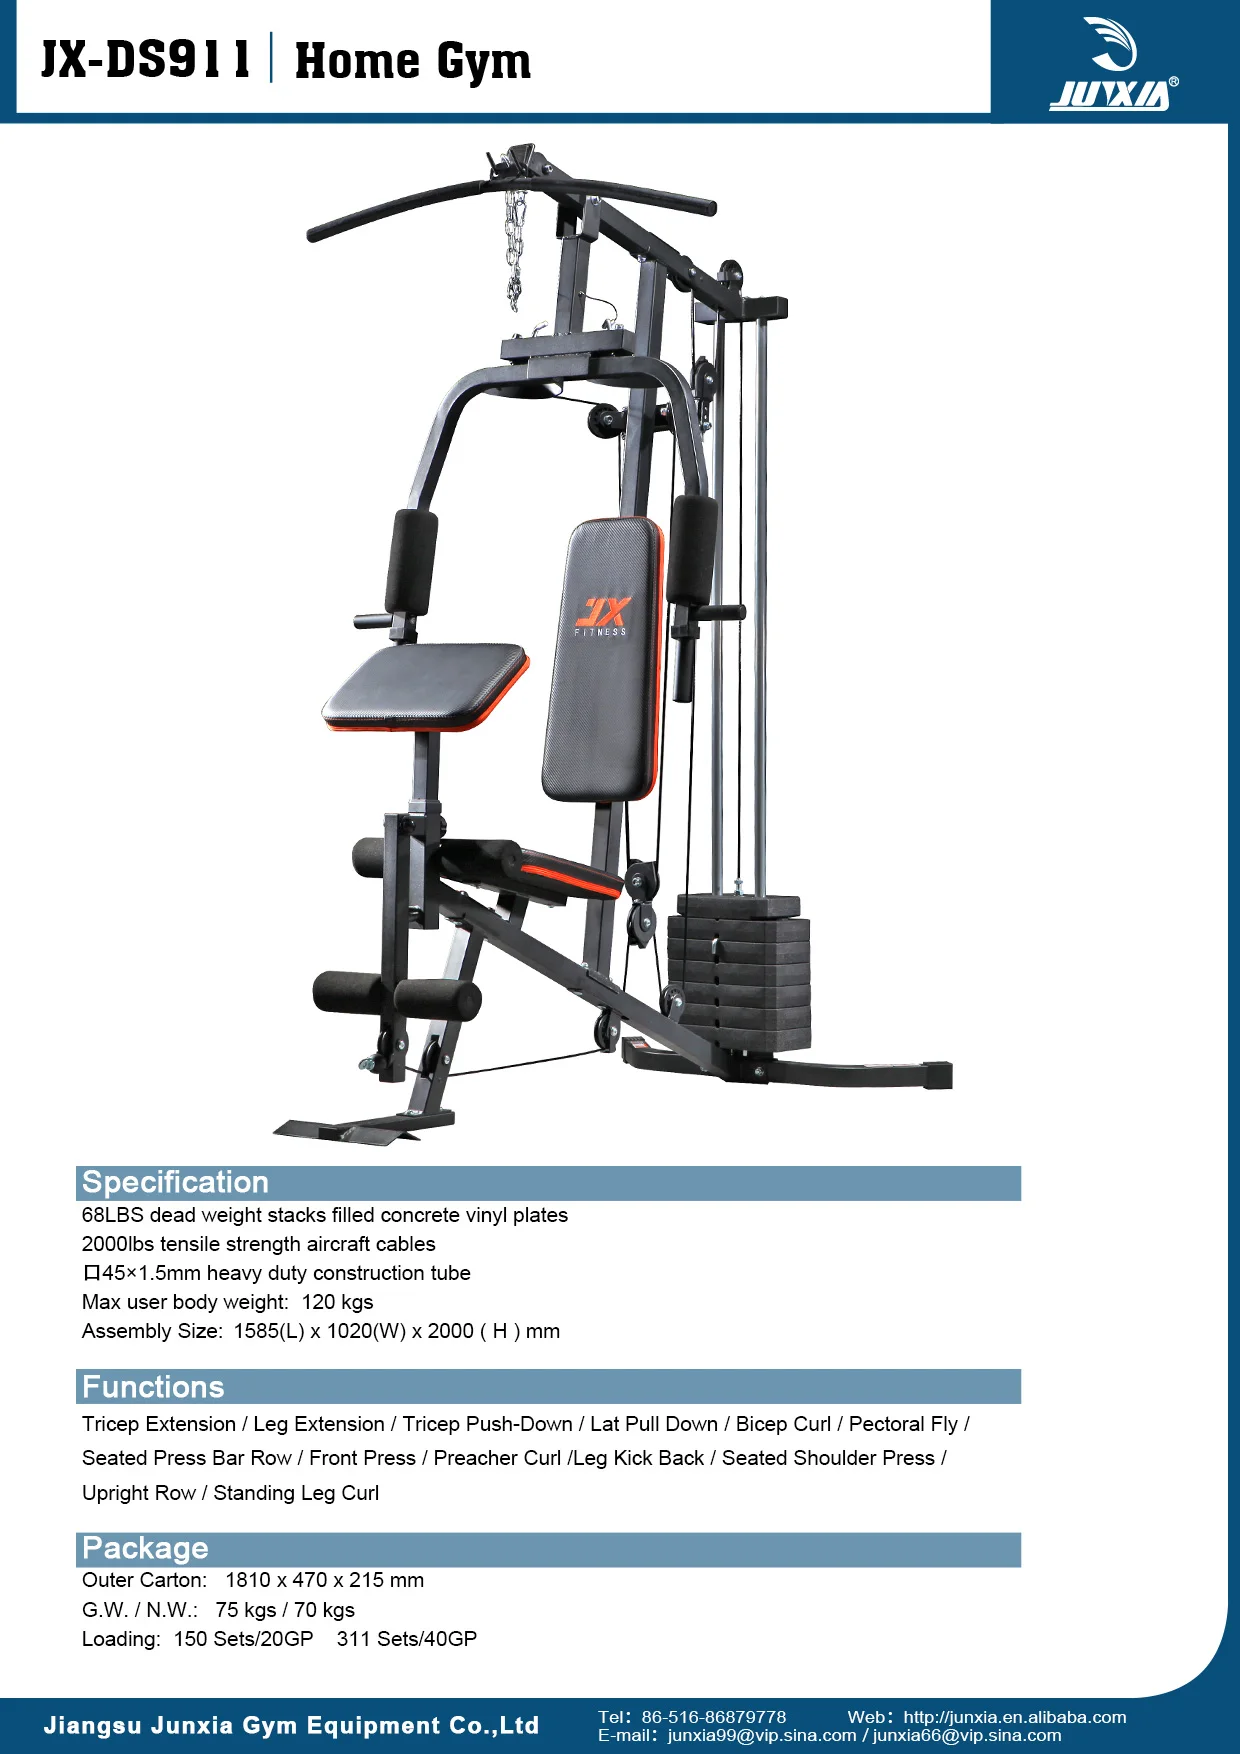 China High Quality Home Gym Fitness Equipment Leader Jx Fitness View Jx Fitness Jx Product Details From Jiangsu Junxia Gym Equipment Co Ltd On Alibaba Com